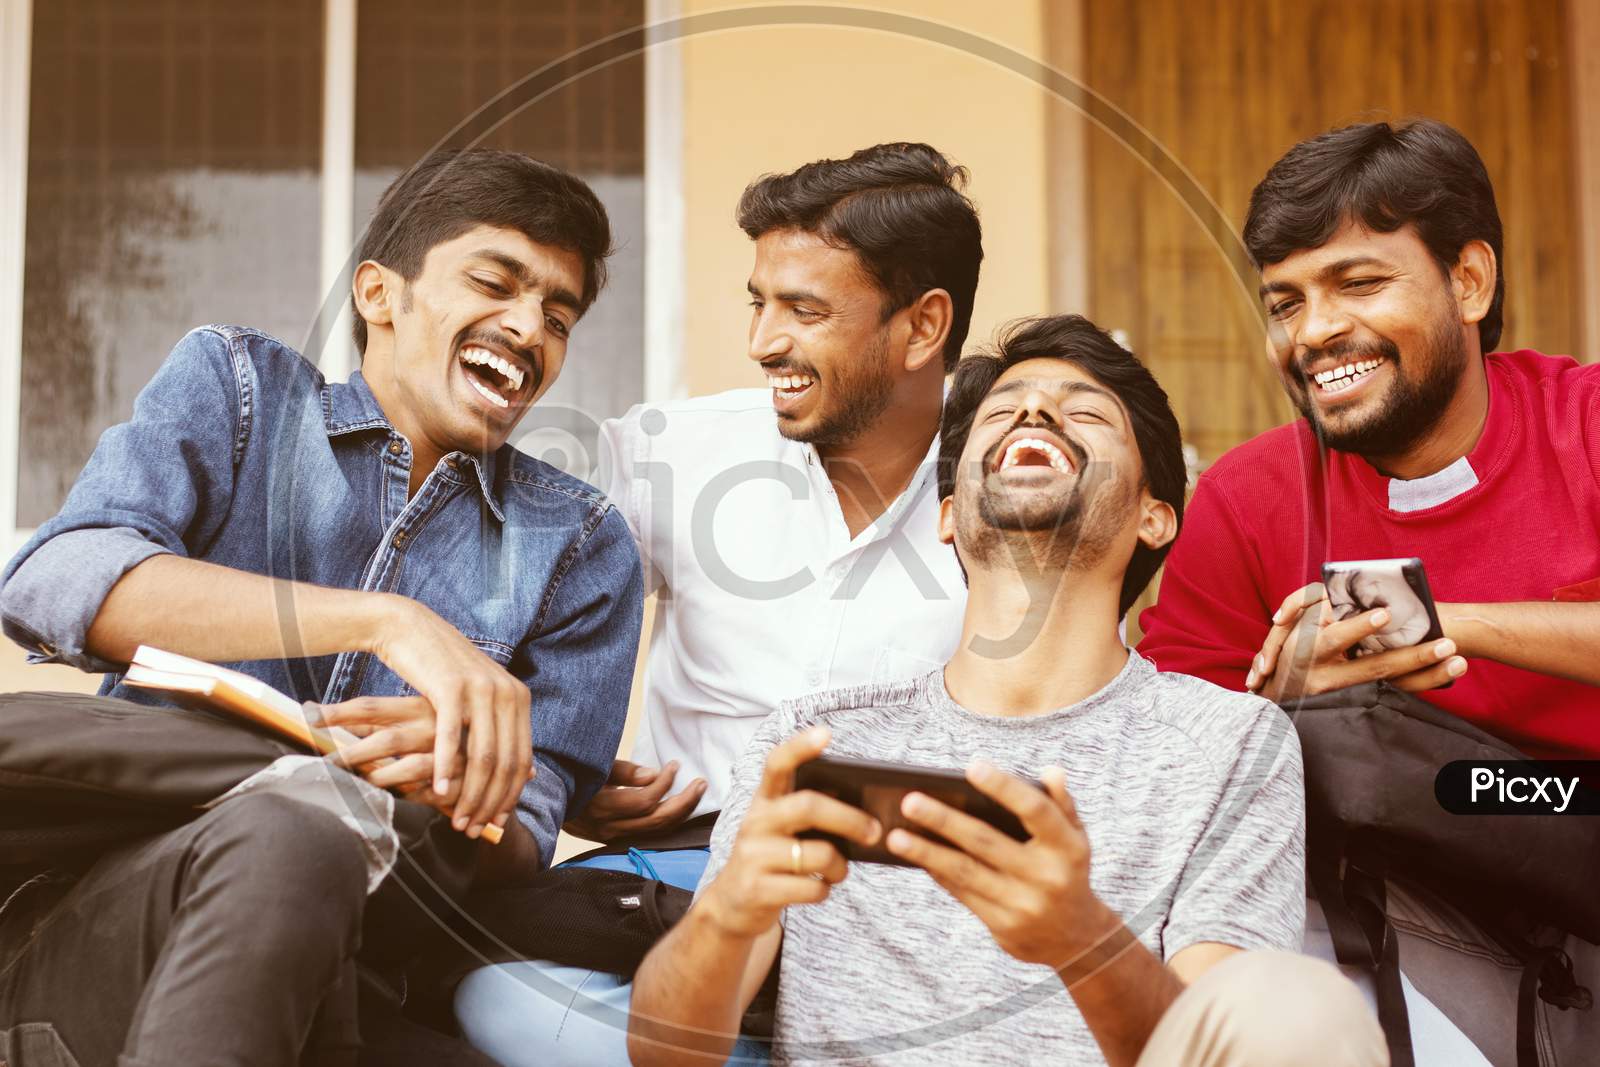 Group Of Happy Young College Students By Looking At Mobile Phone Laughing Loudly At University Campus - Millennials Enjoying Online Video Content Or Social Media By Watching Smart Phone.